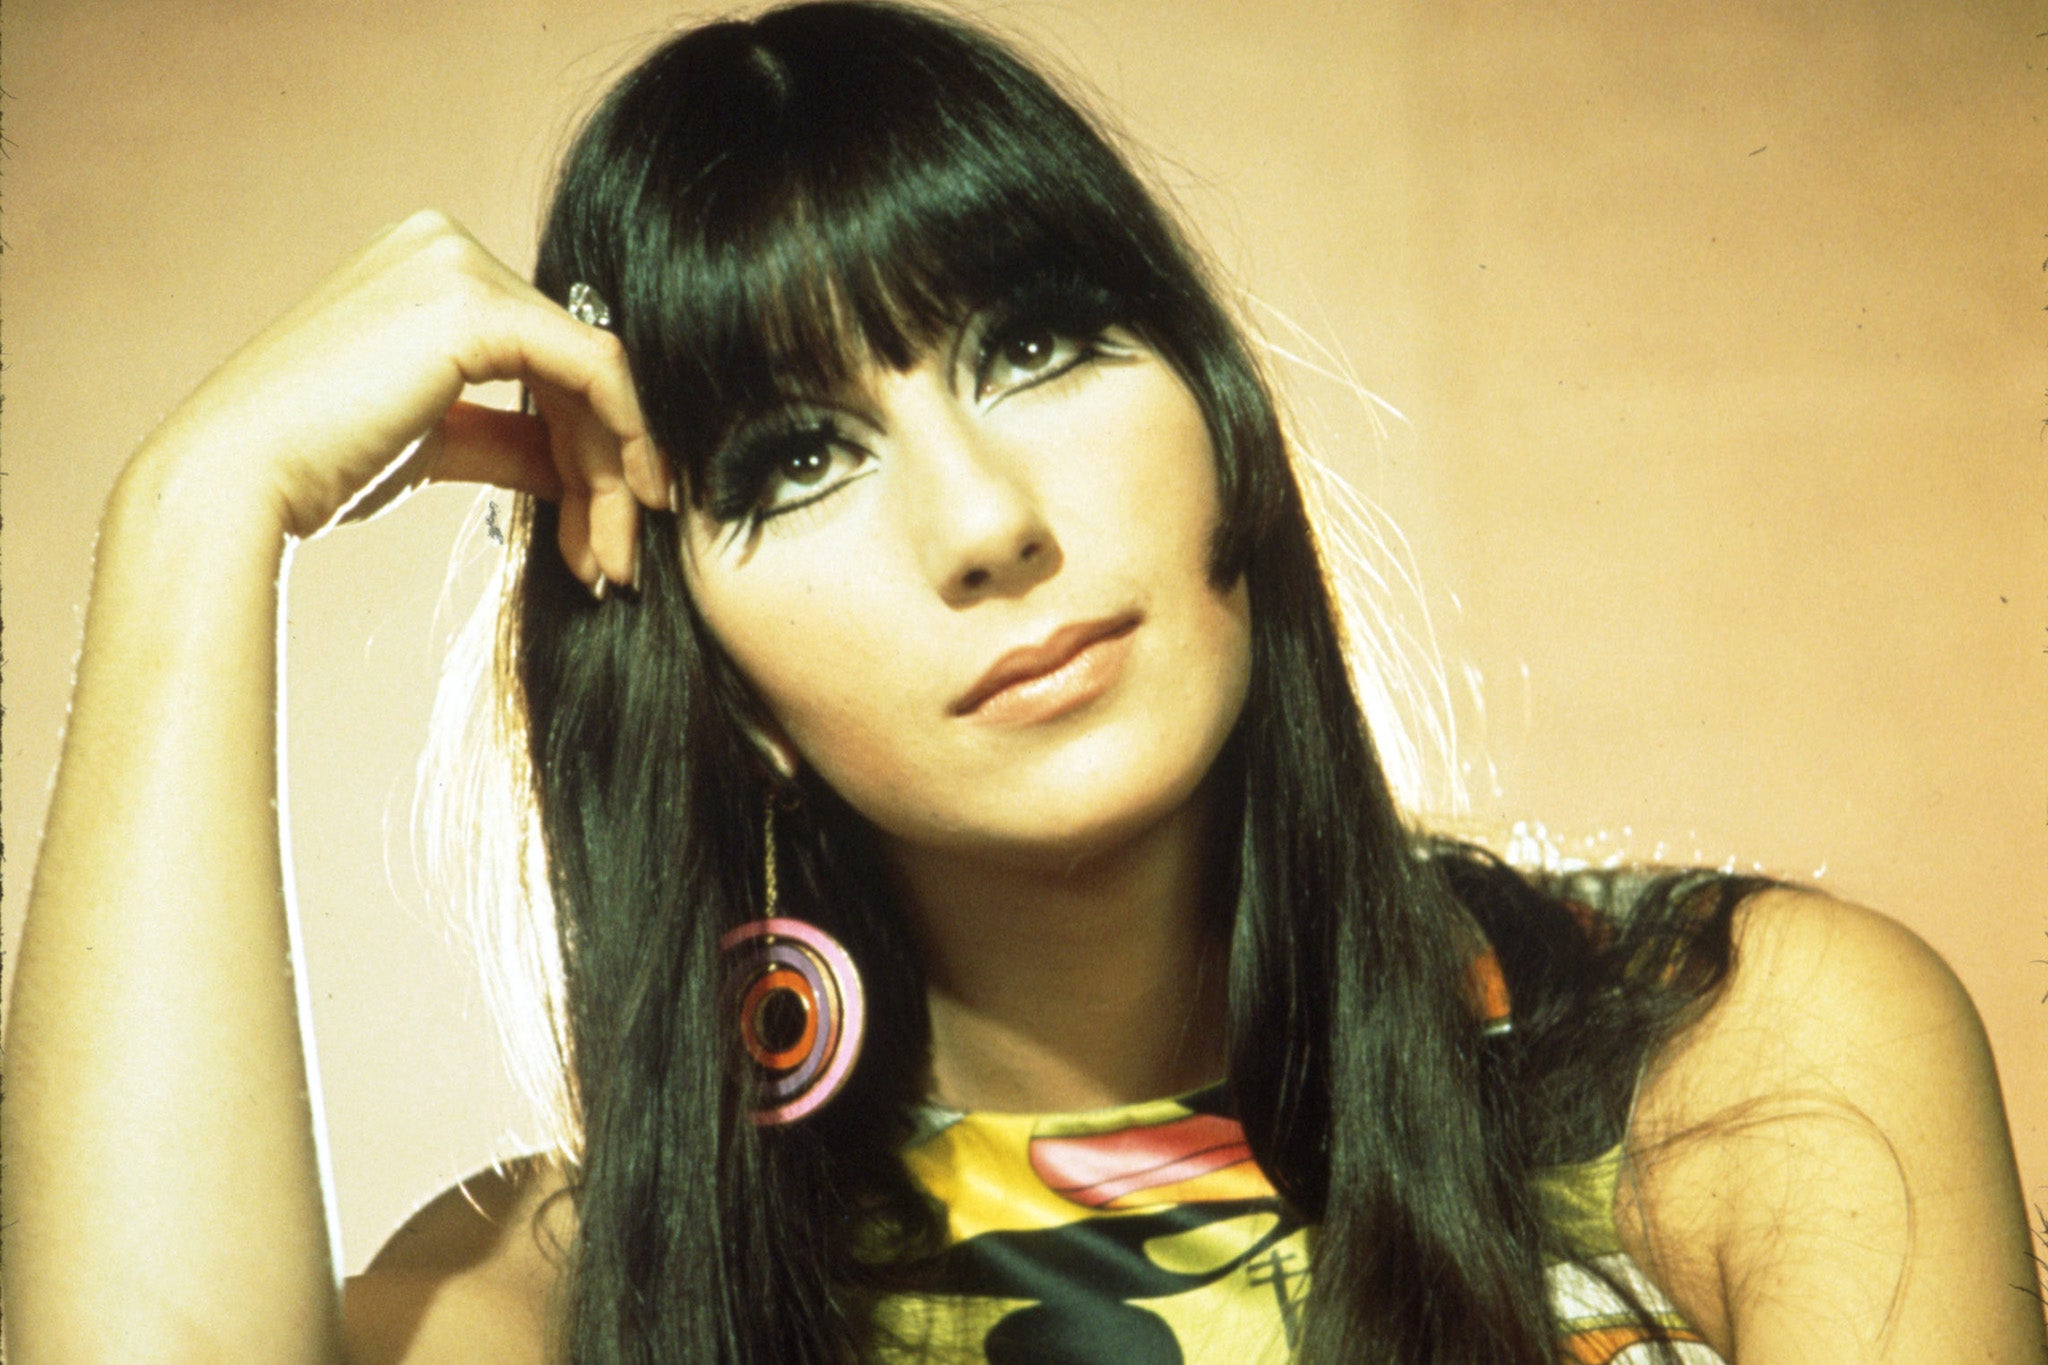 Early triumph: the Oscar-winning actor and singer Cher in 1973